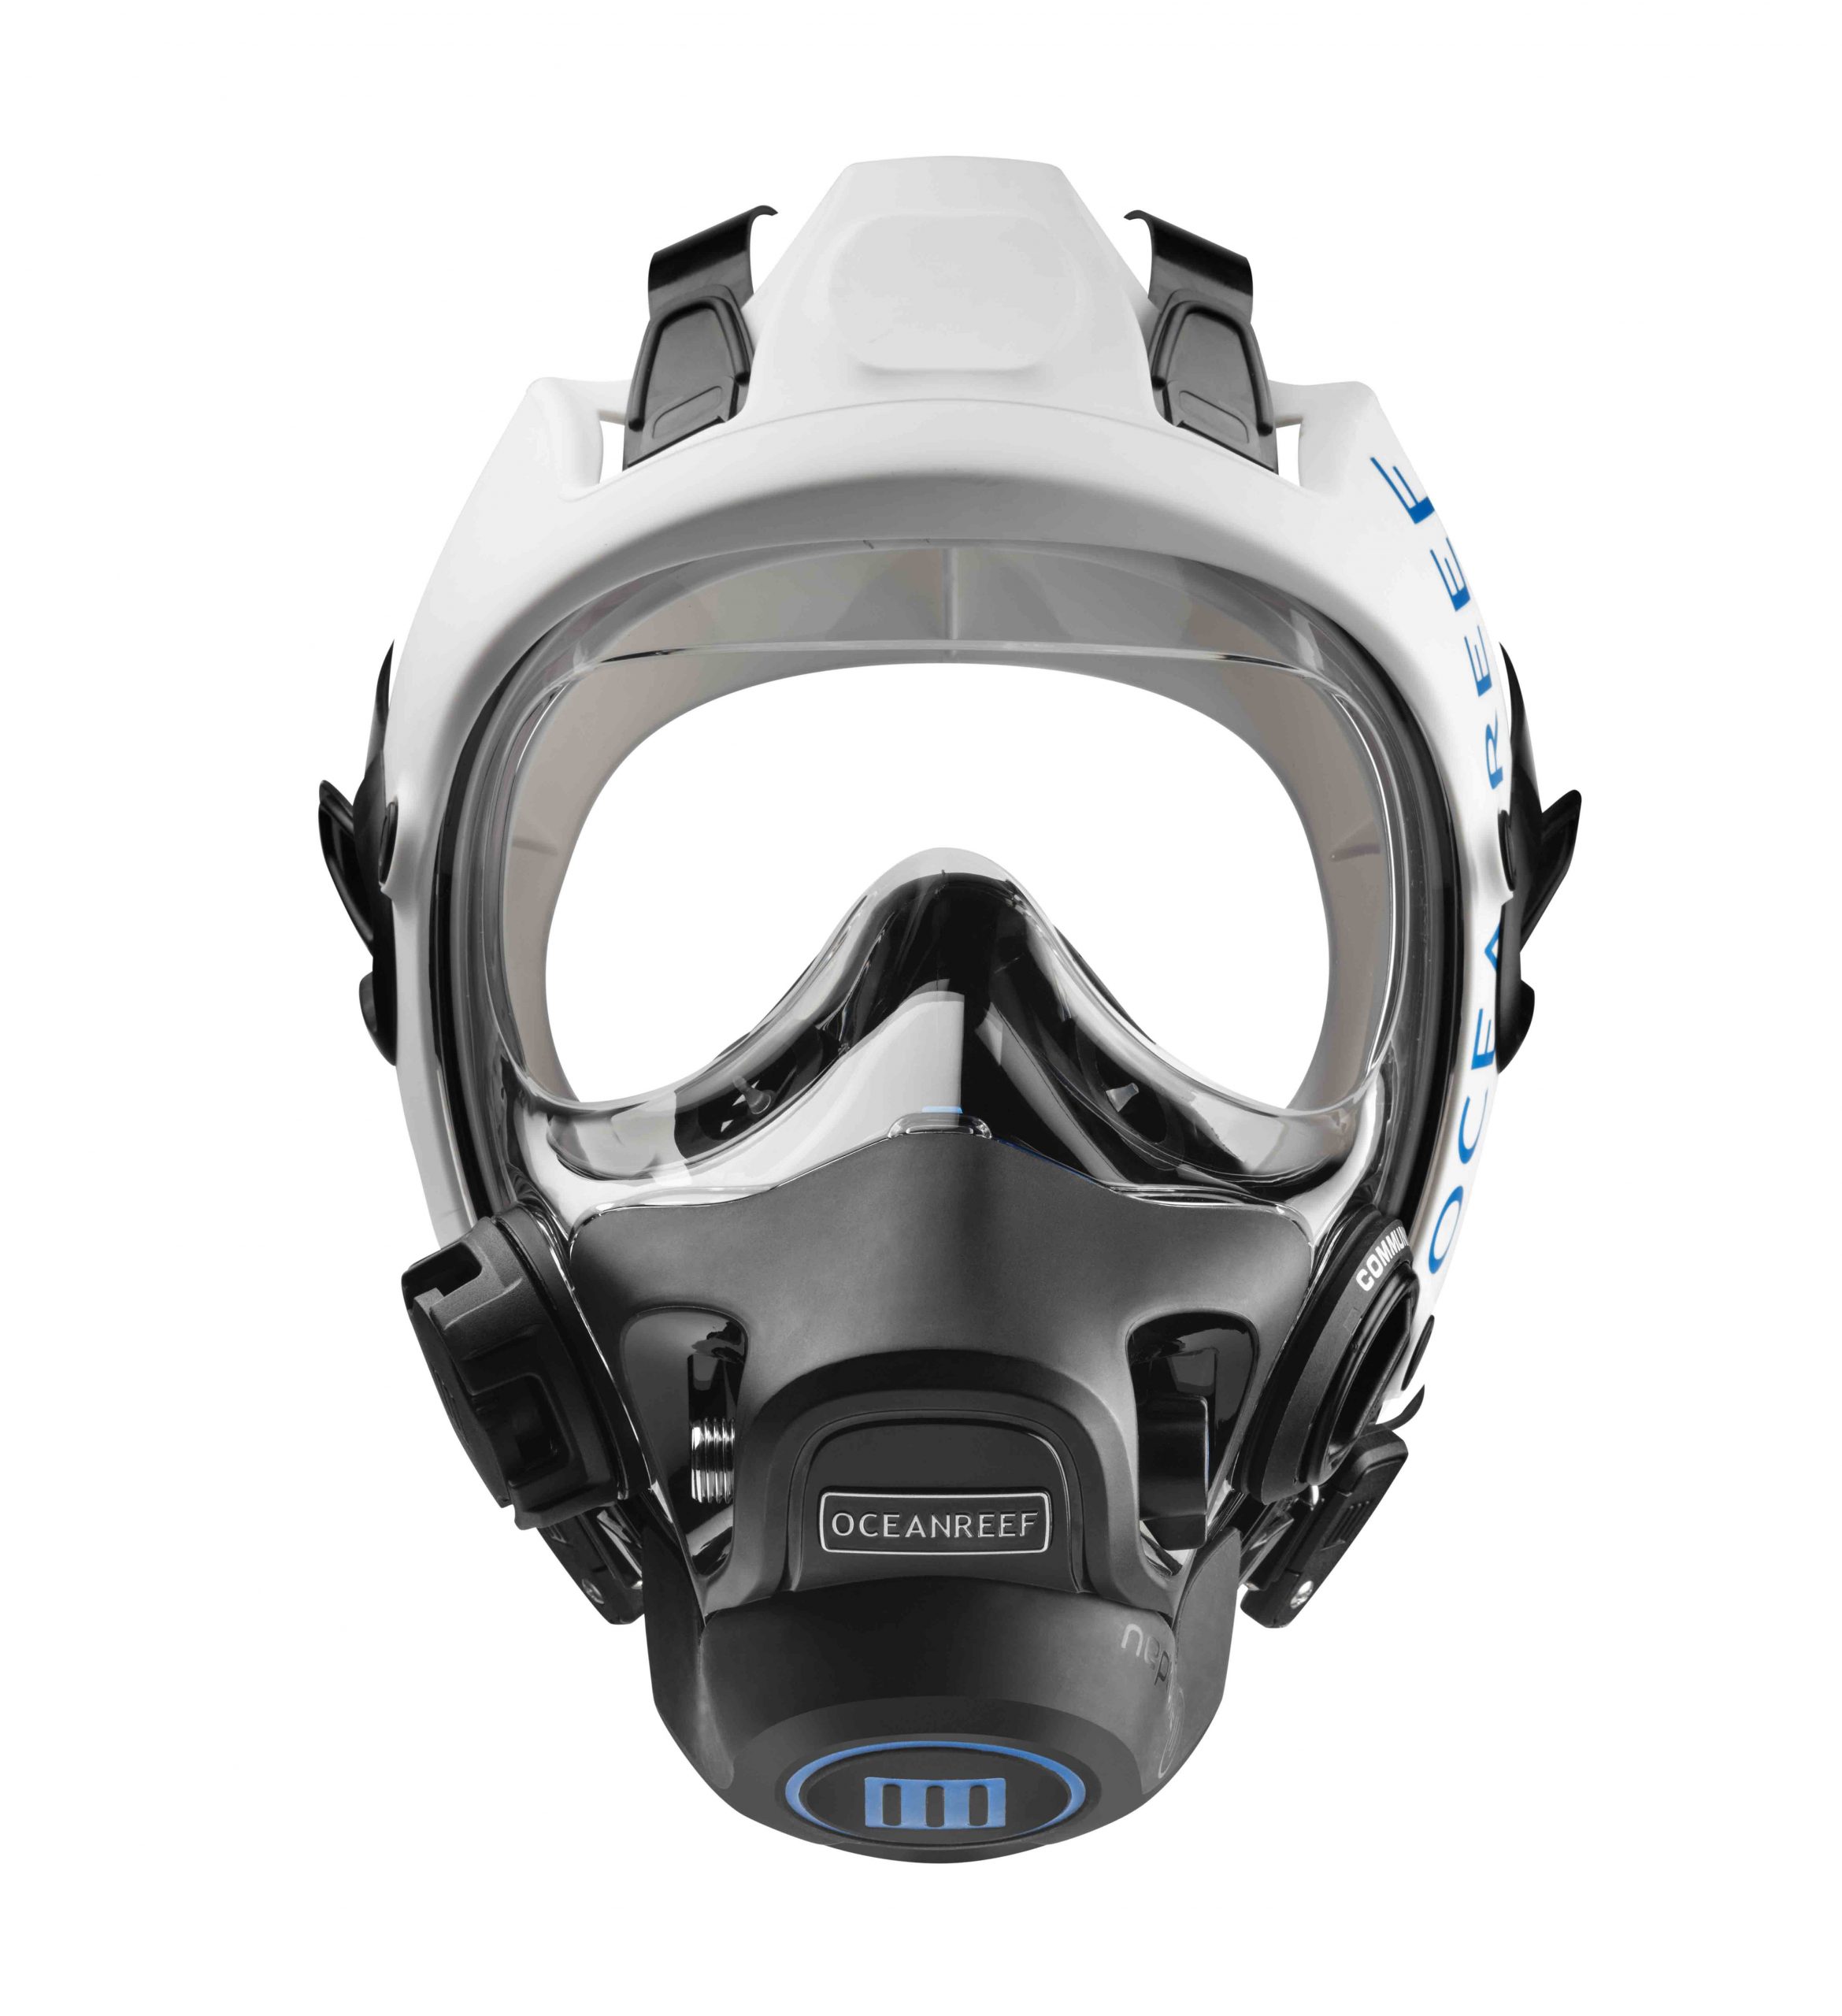 How to Find the Best Scuba Diving Masks for Smaller Faces